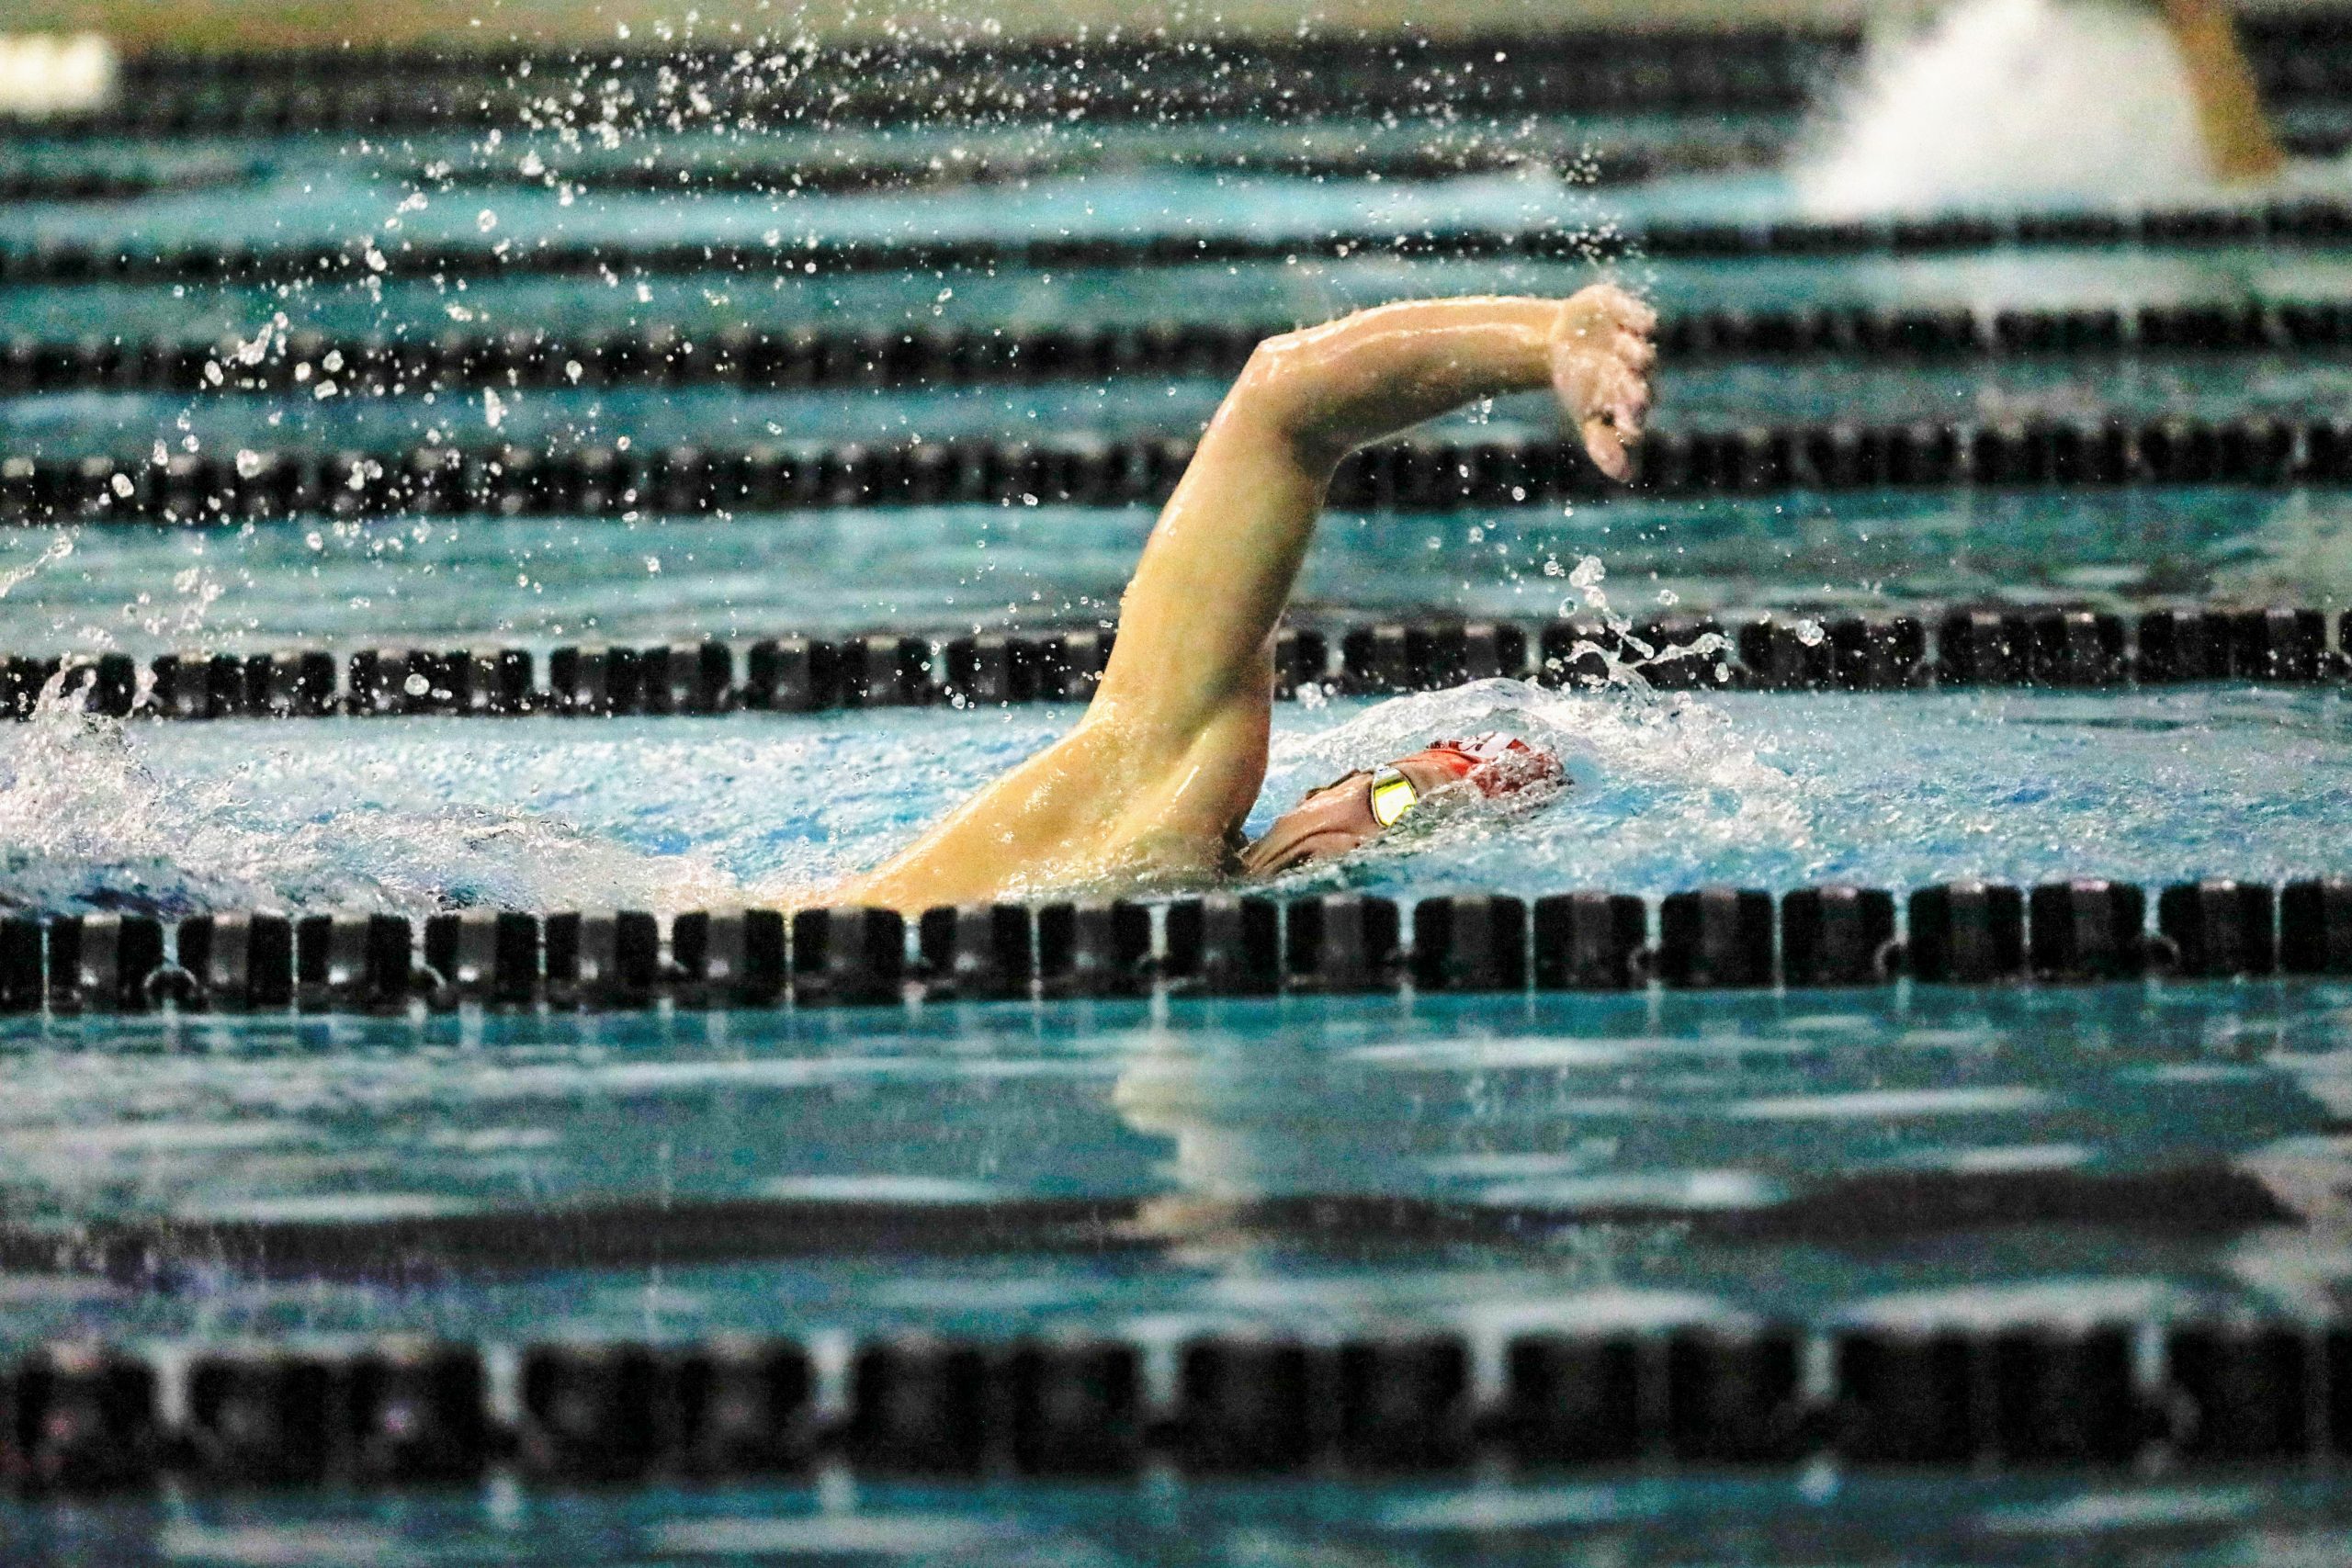 A Gardner-Webb University swimmer grabs a breath during the freestyle 500-meter race. Photography by Kelly Teseny